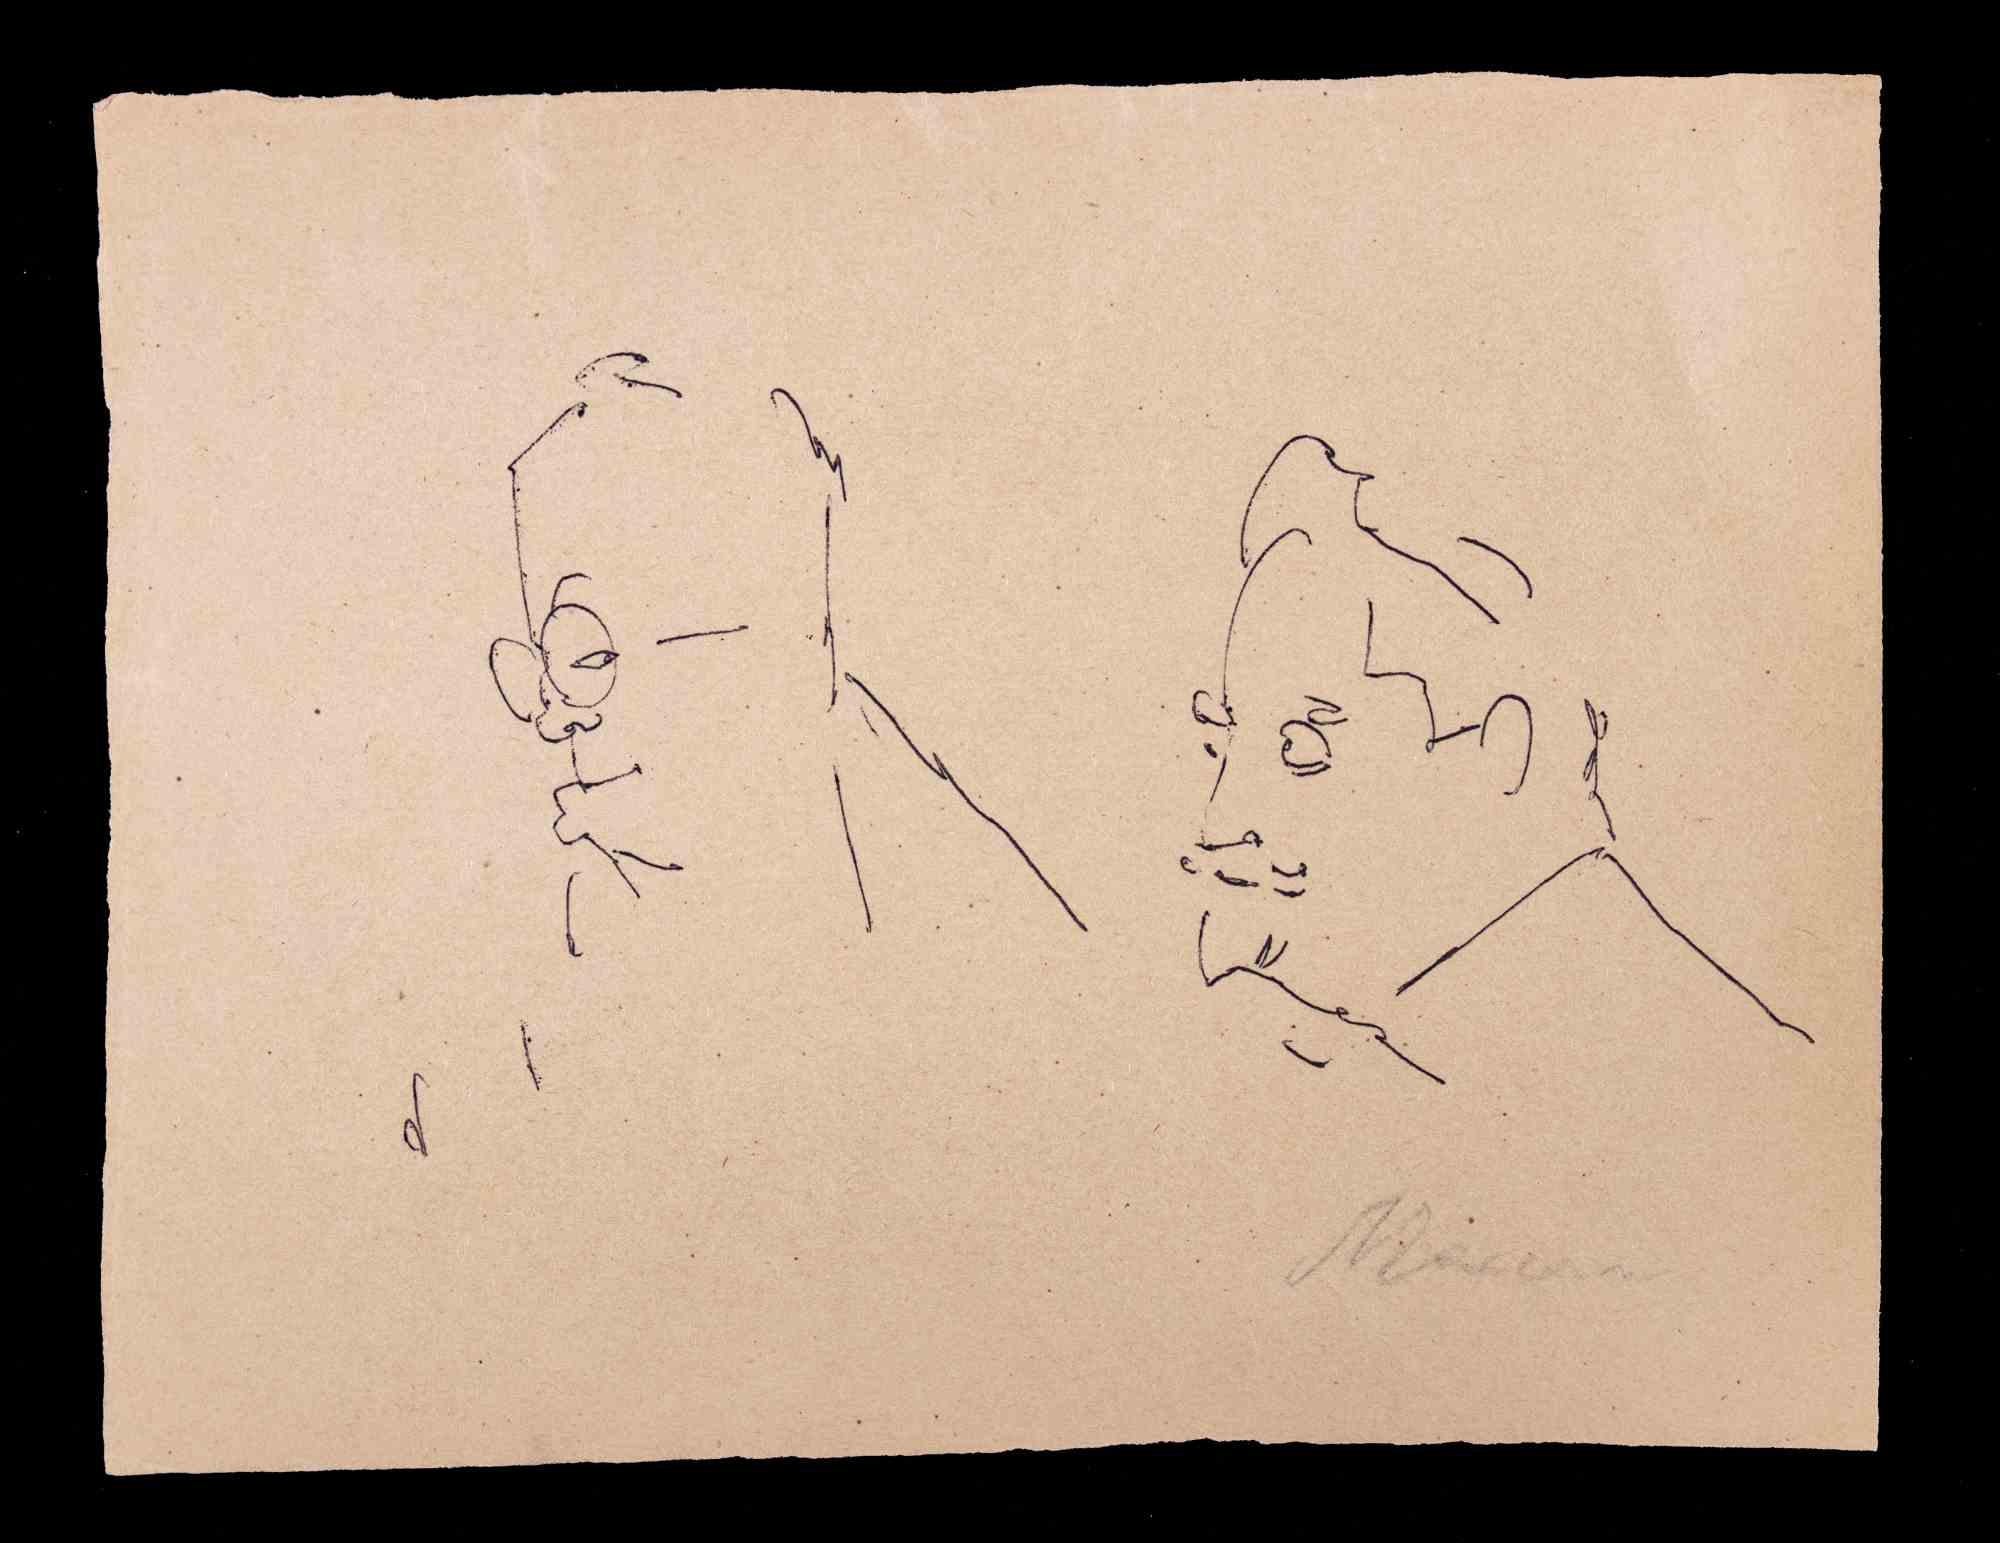 Portraits is a Pen Drawing realized by Mino Maccari  (1924-1989) in 1960s.

Hand-signed on the lower margin.

Good condition on a yellowed paper.

Mino Maccari (Siena, 1924-Rome, June 16, 1989) was an Italian writer, painter, engraver and